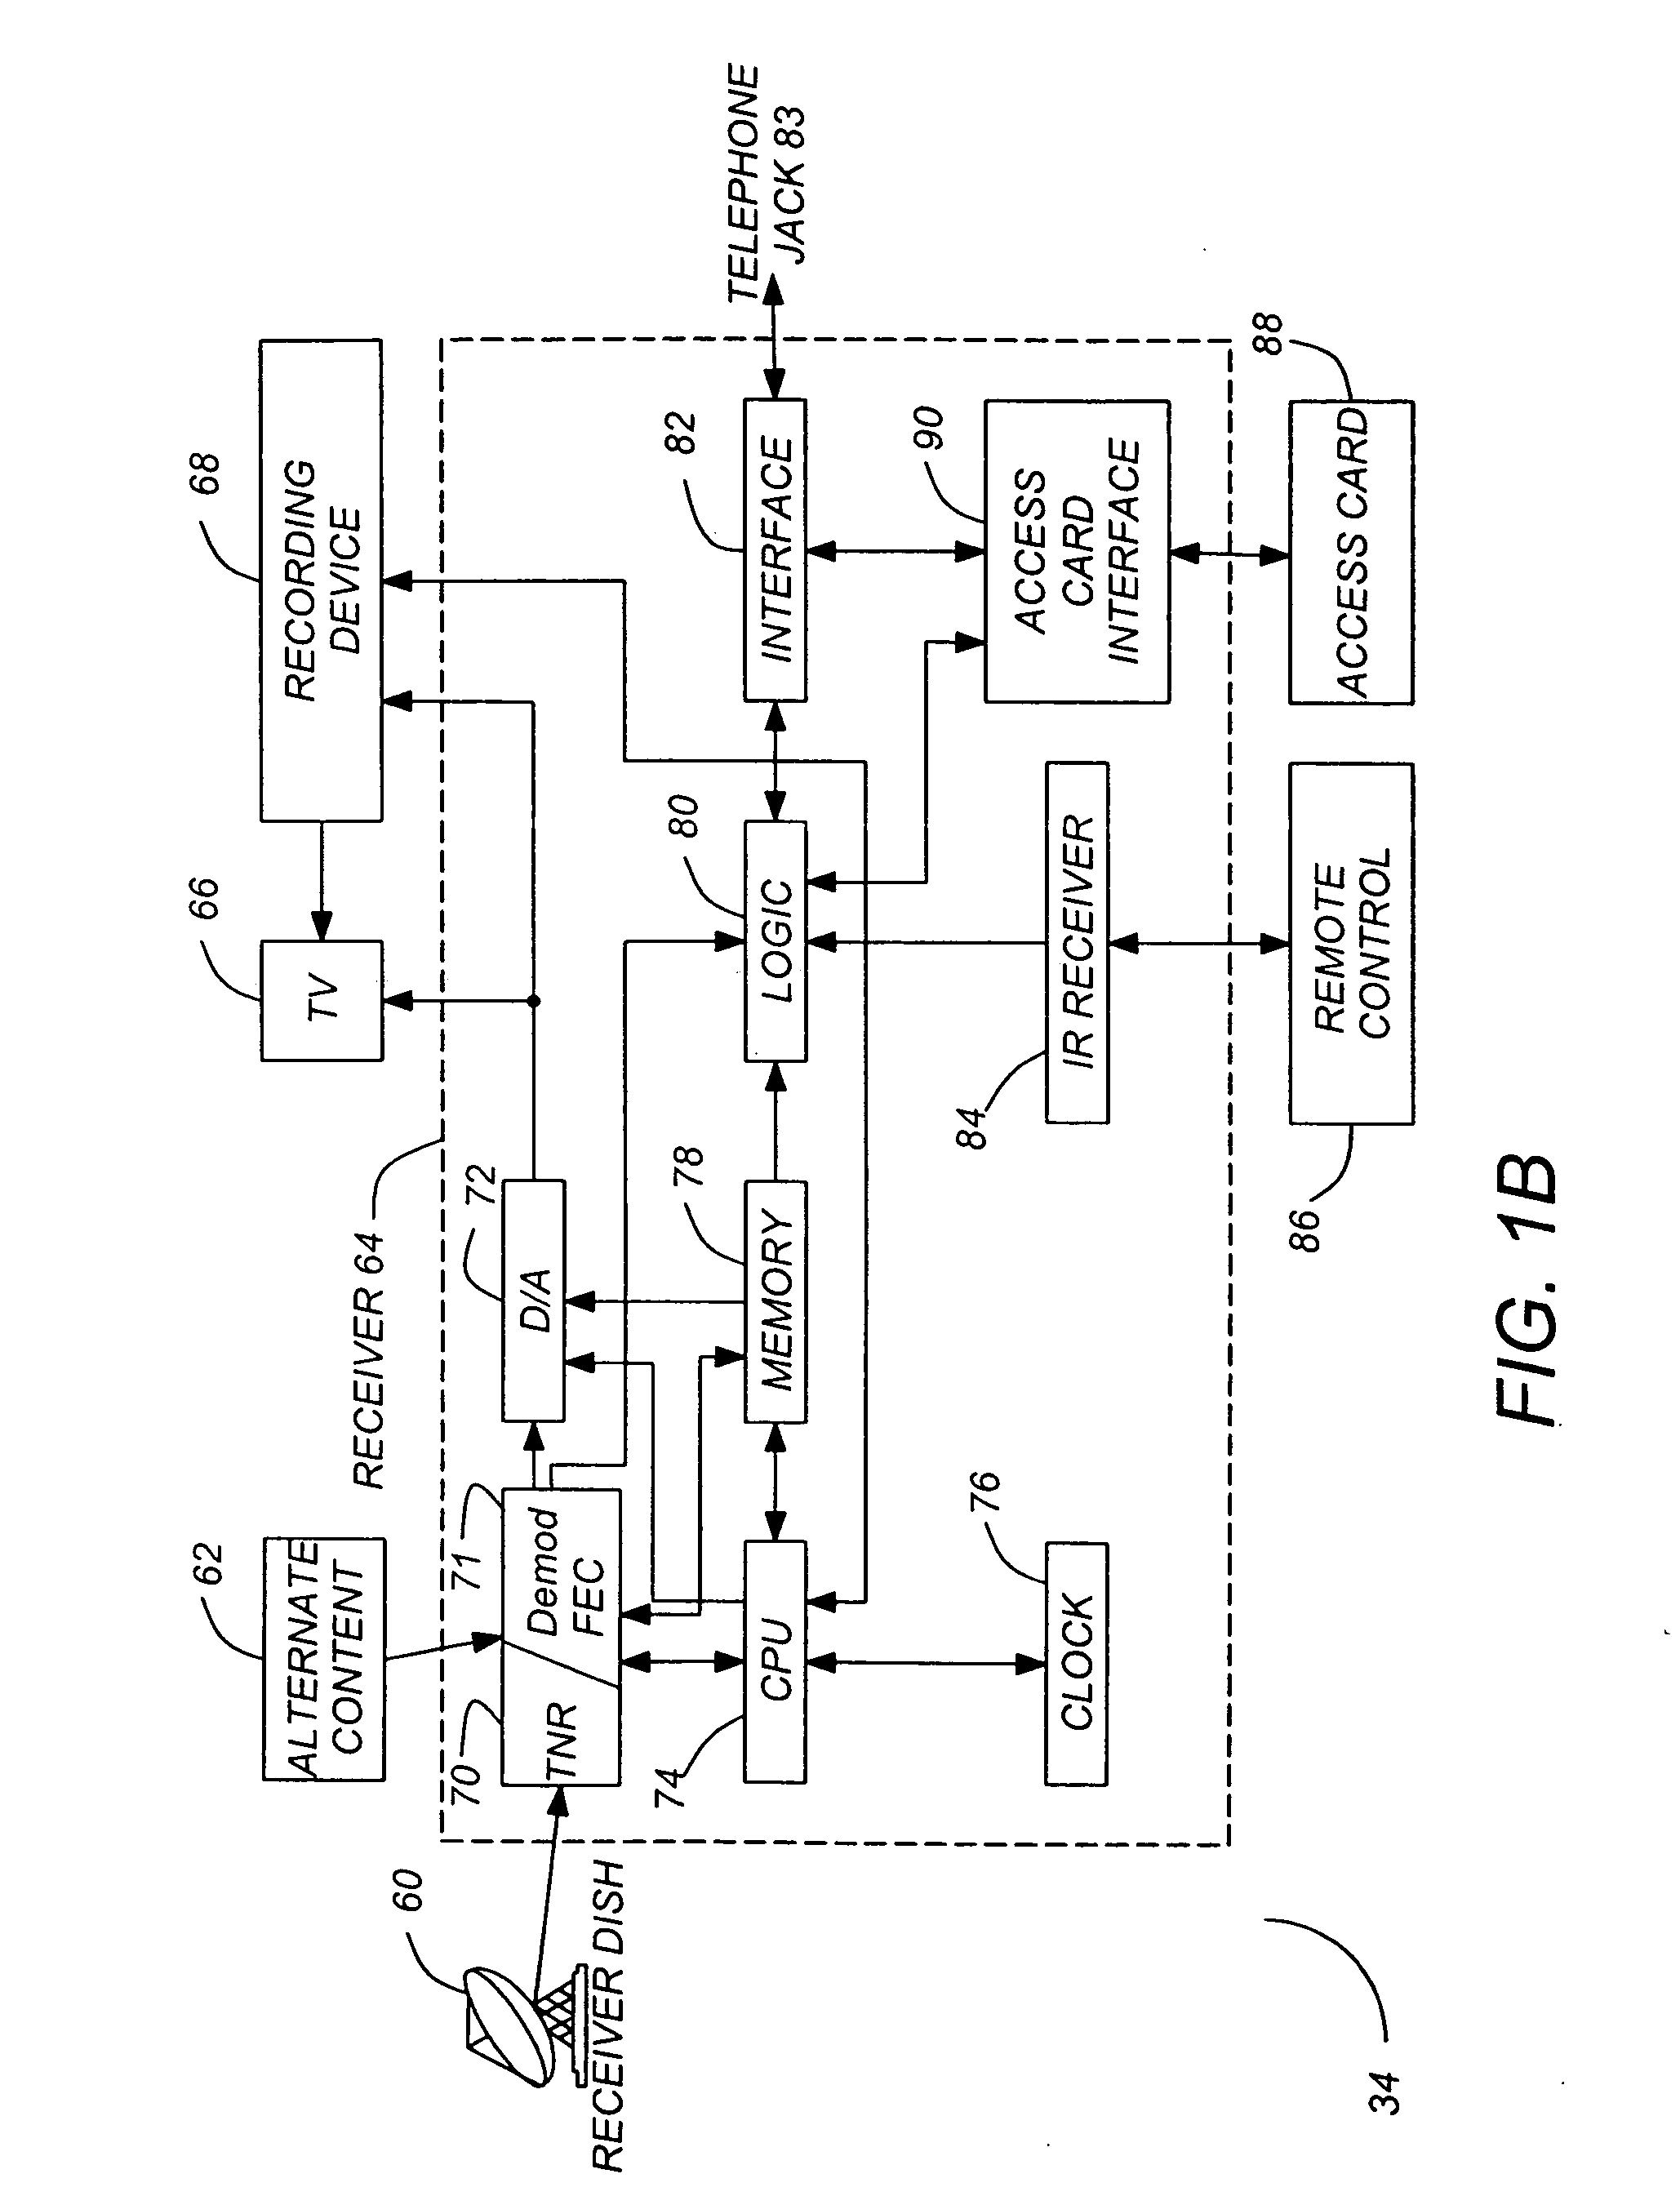 Methods and apparatuses for minimizing co-channel interference